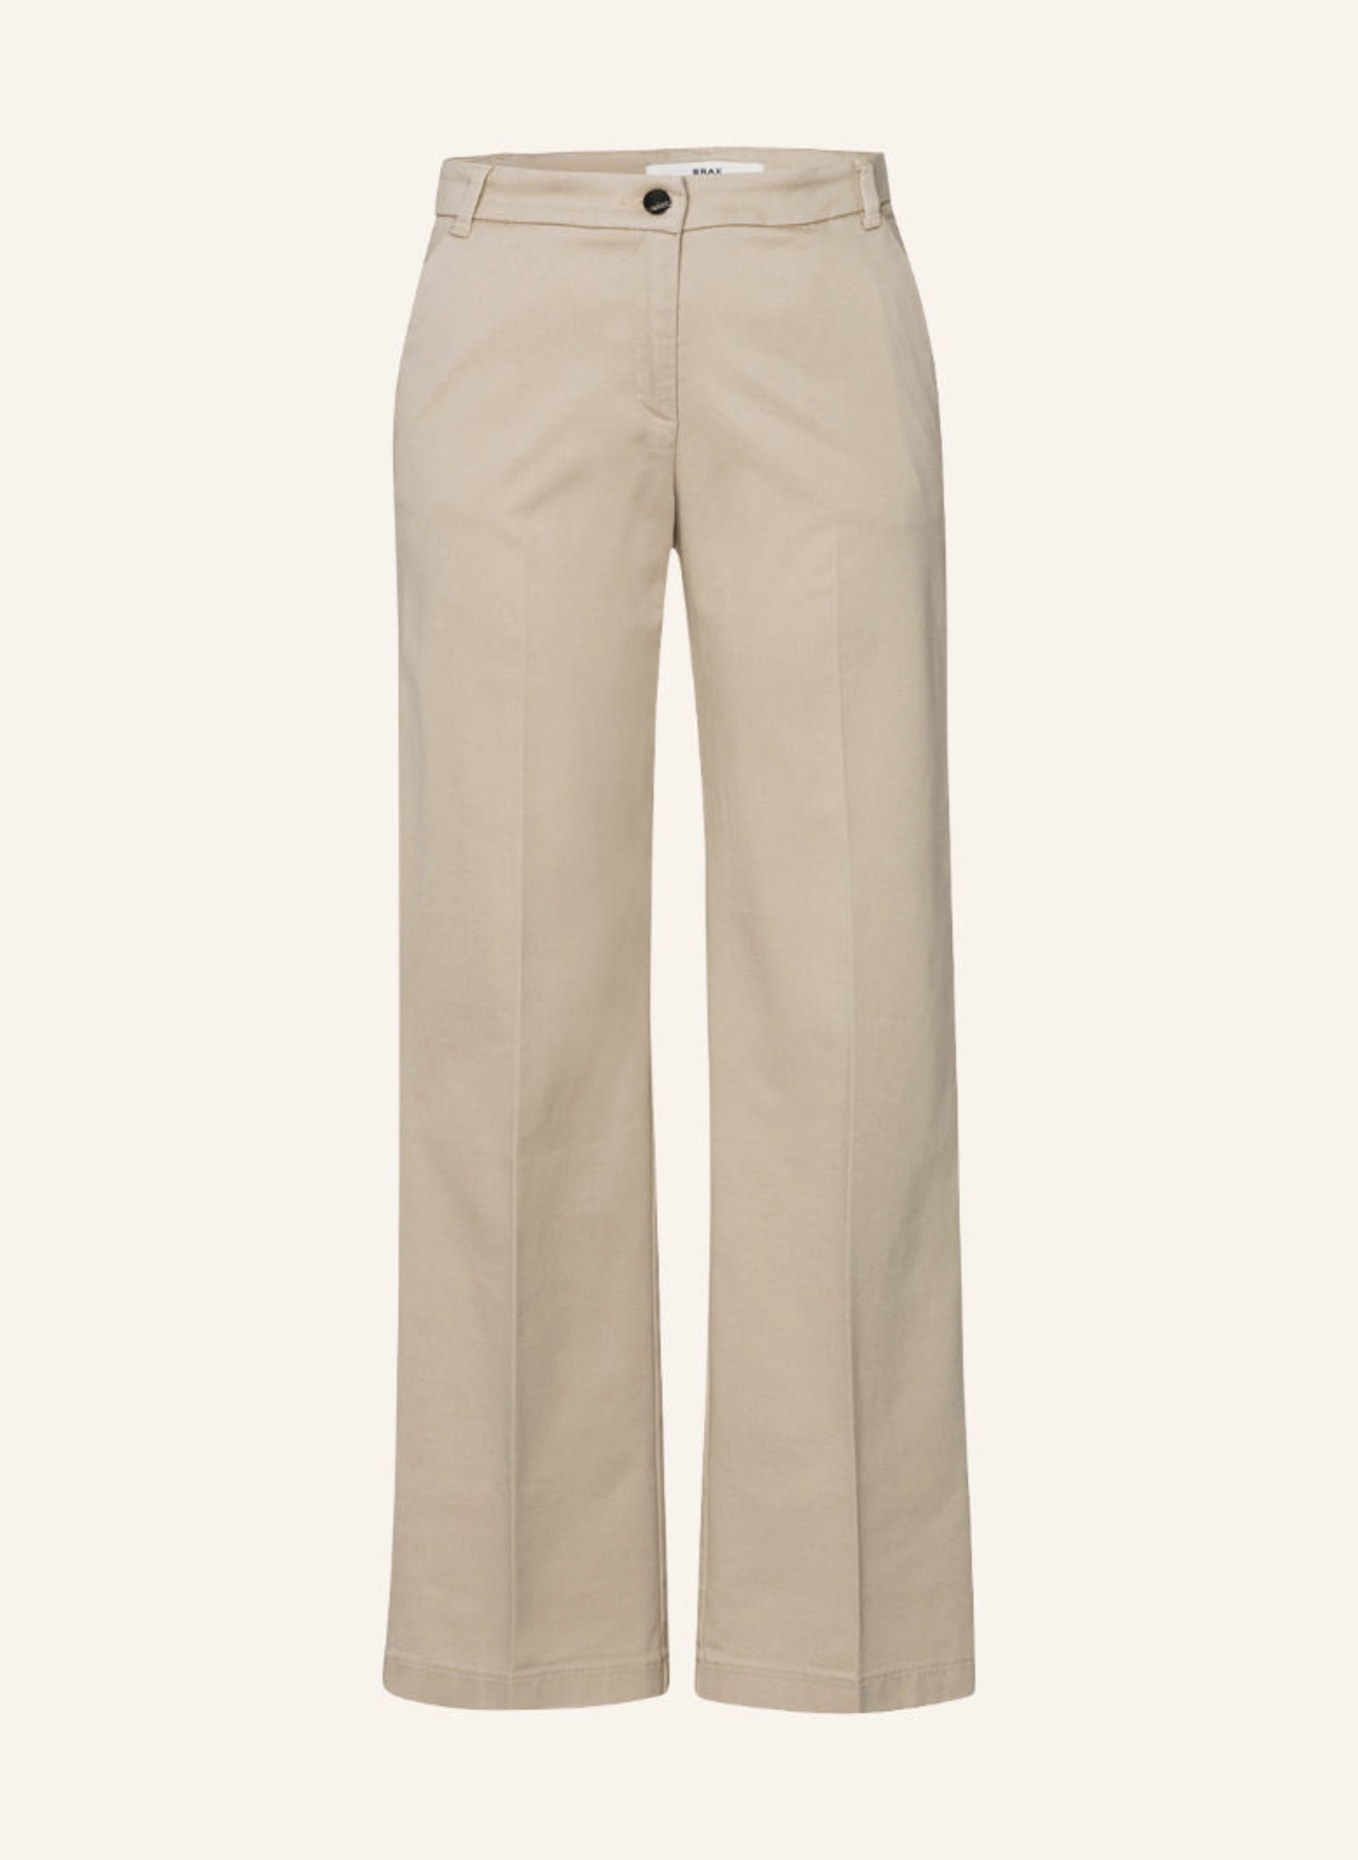 BRAX Palazzohose in beige MAINE STYLE